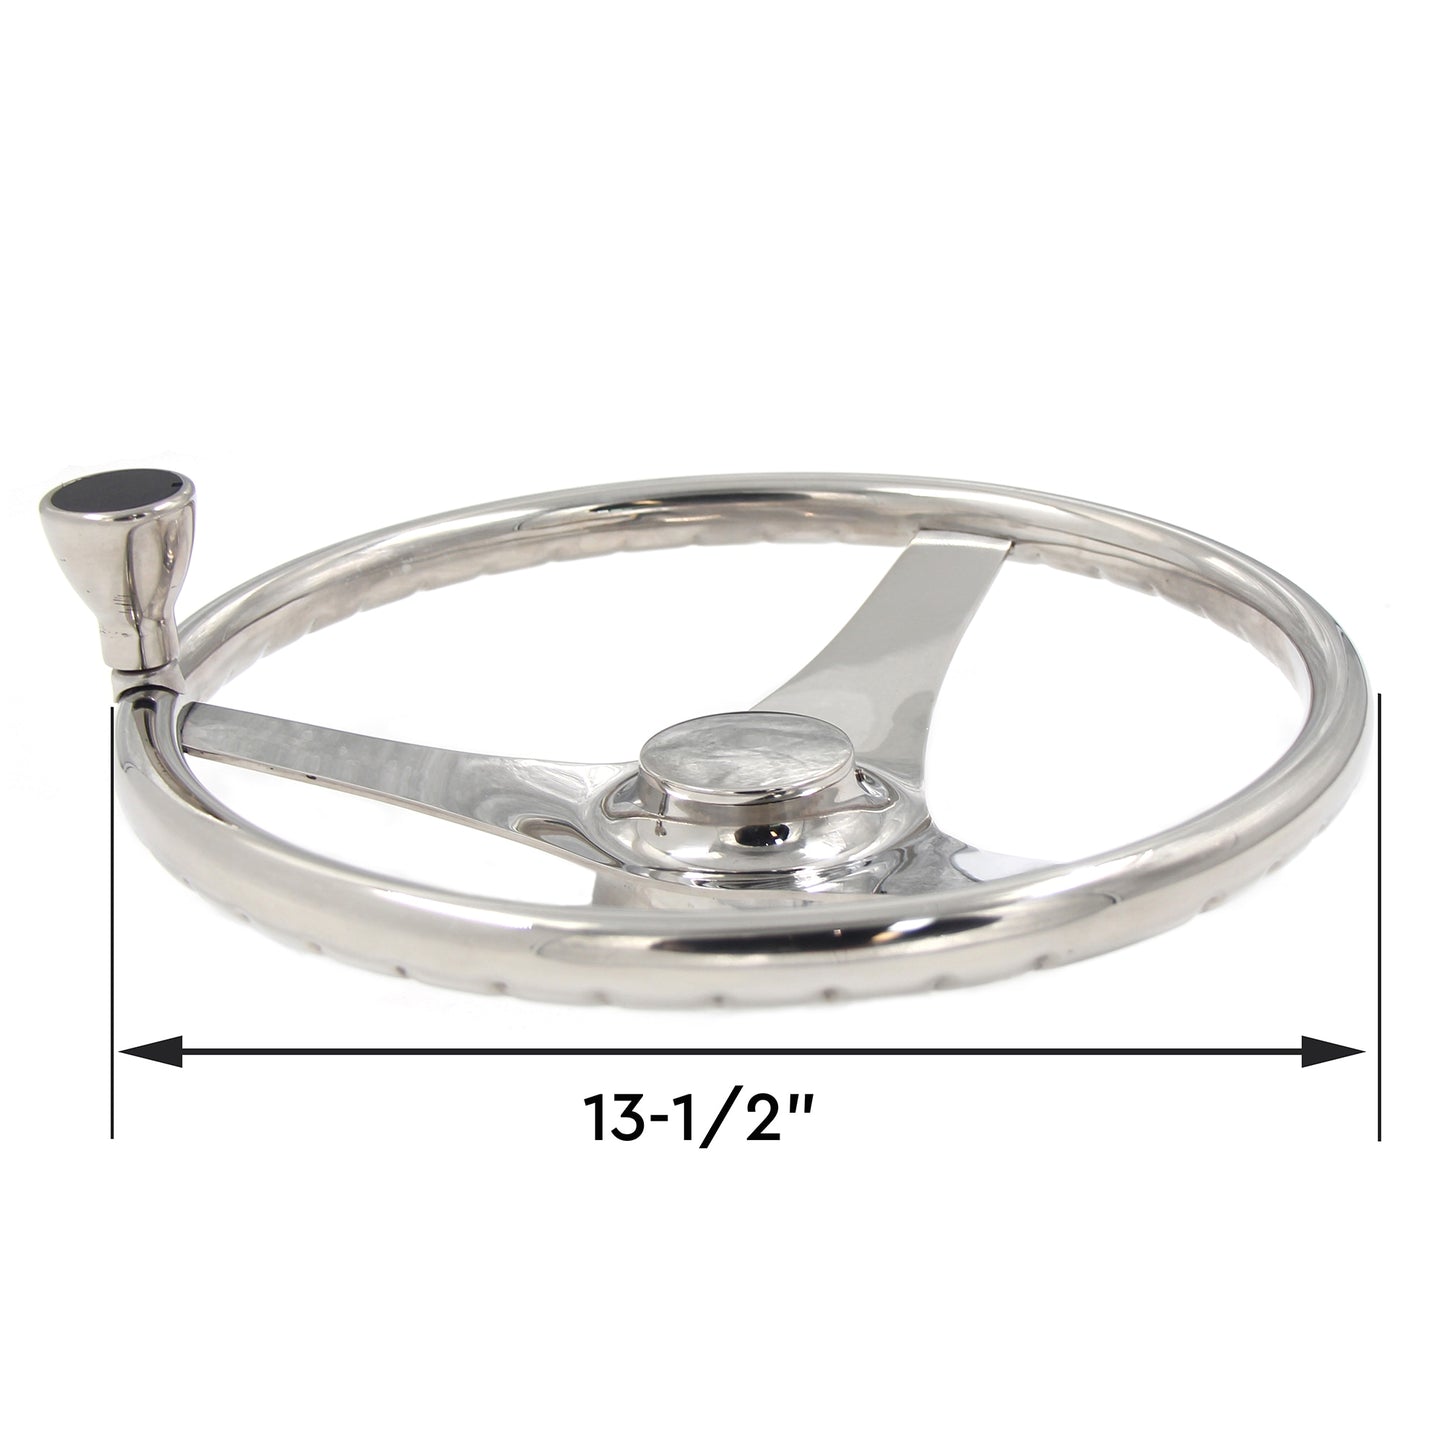 13-1/2" Marine Stainless Steel Steering 3-Spoke Wheel With Knob Grip Boat Accessories Fit For Boat